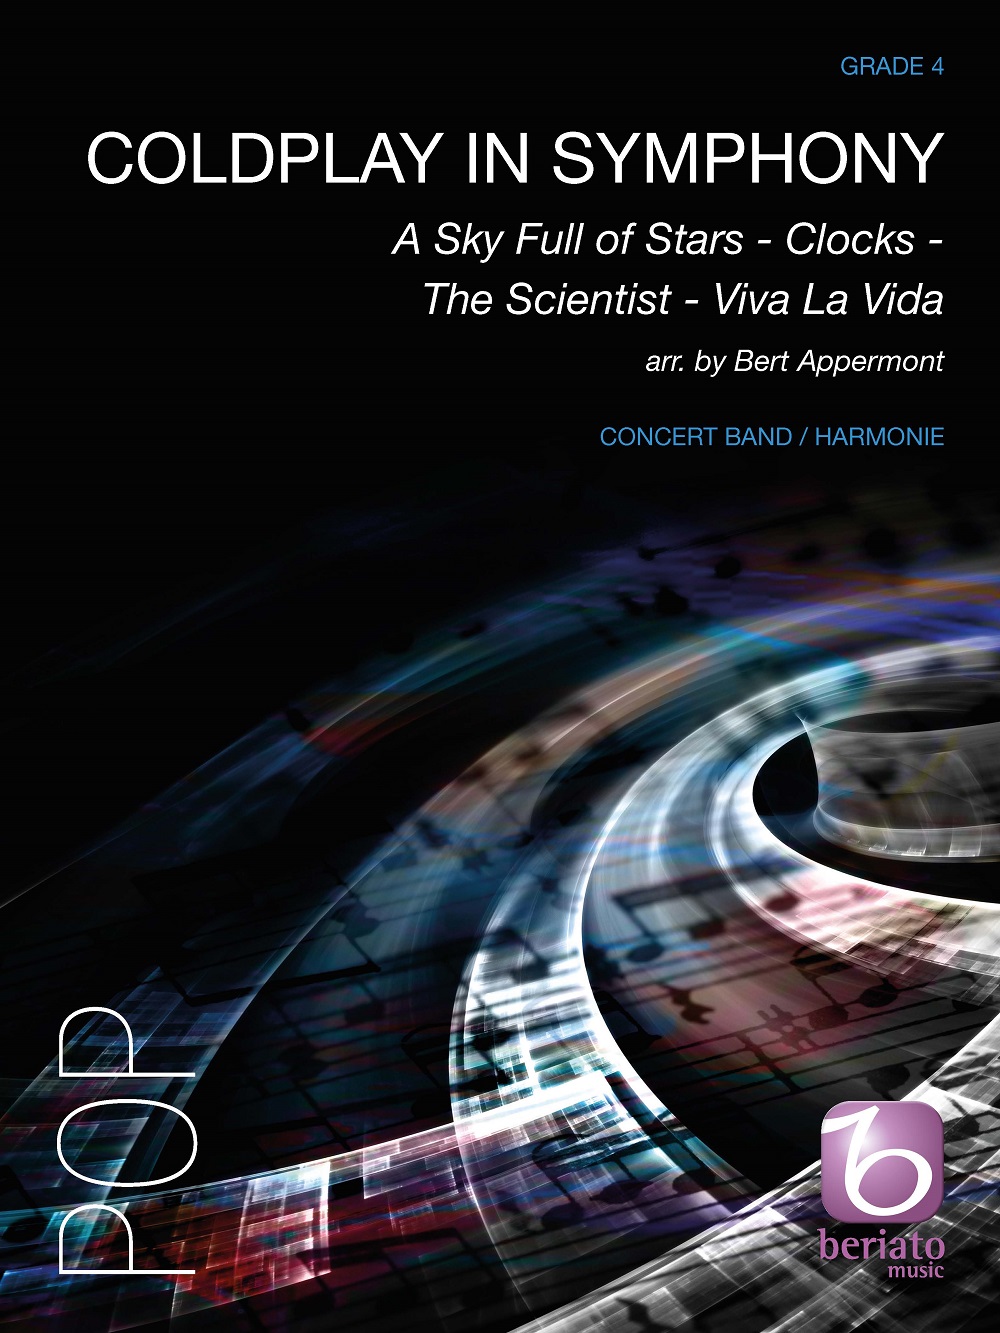 Coldplay in Symphony: Concert Band: Score & Parts